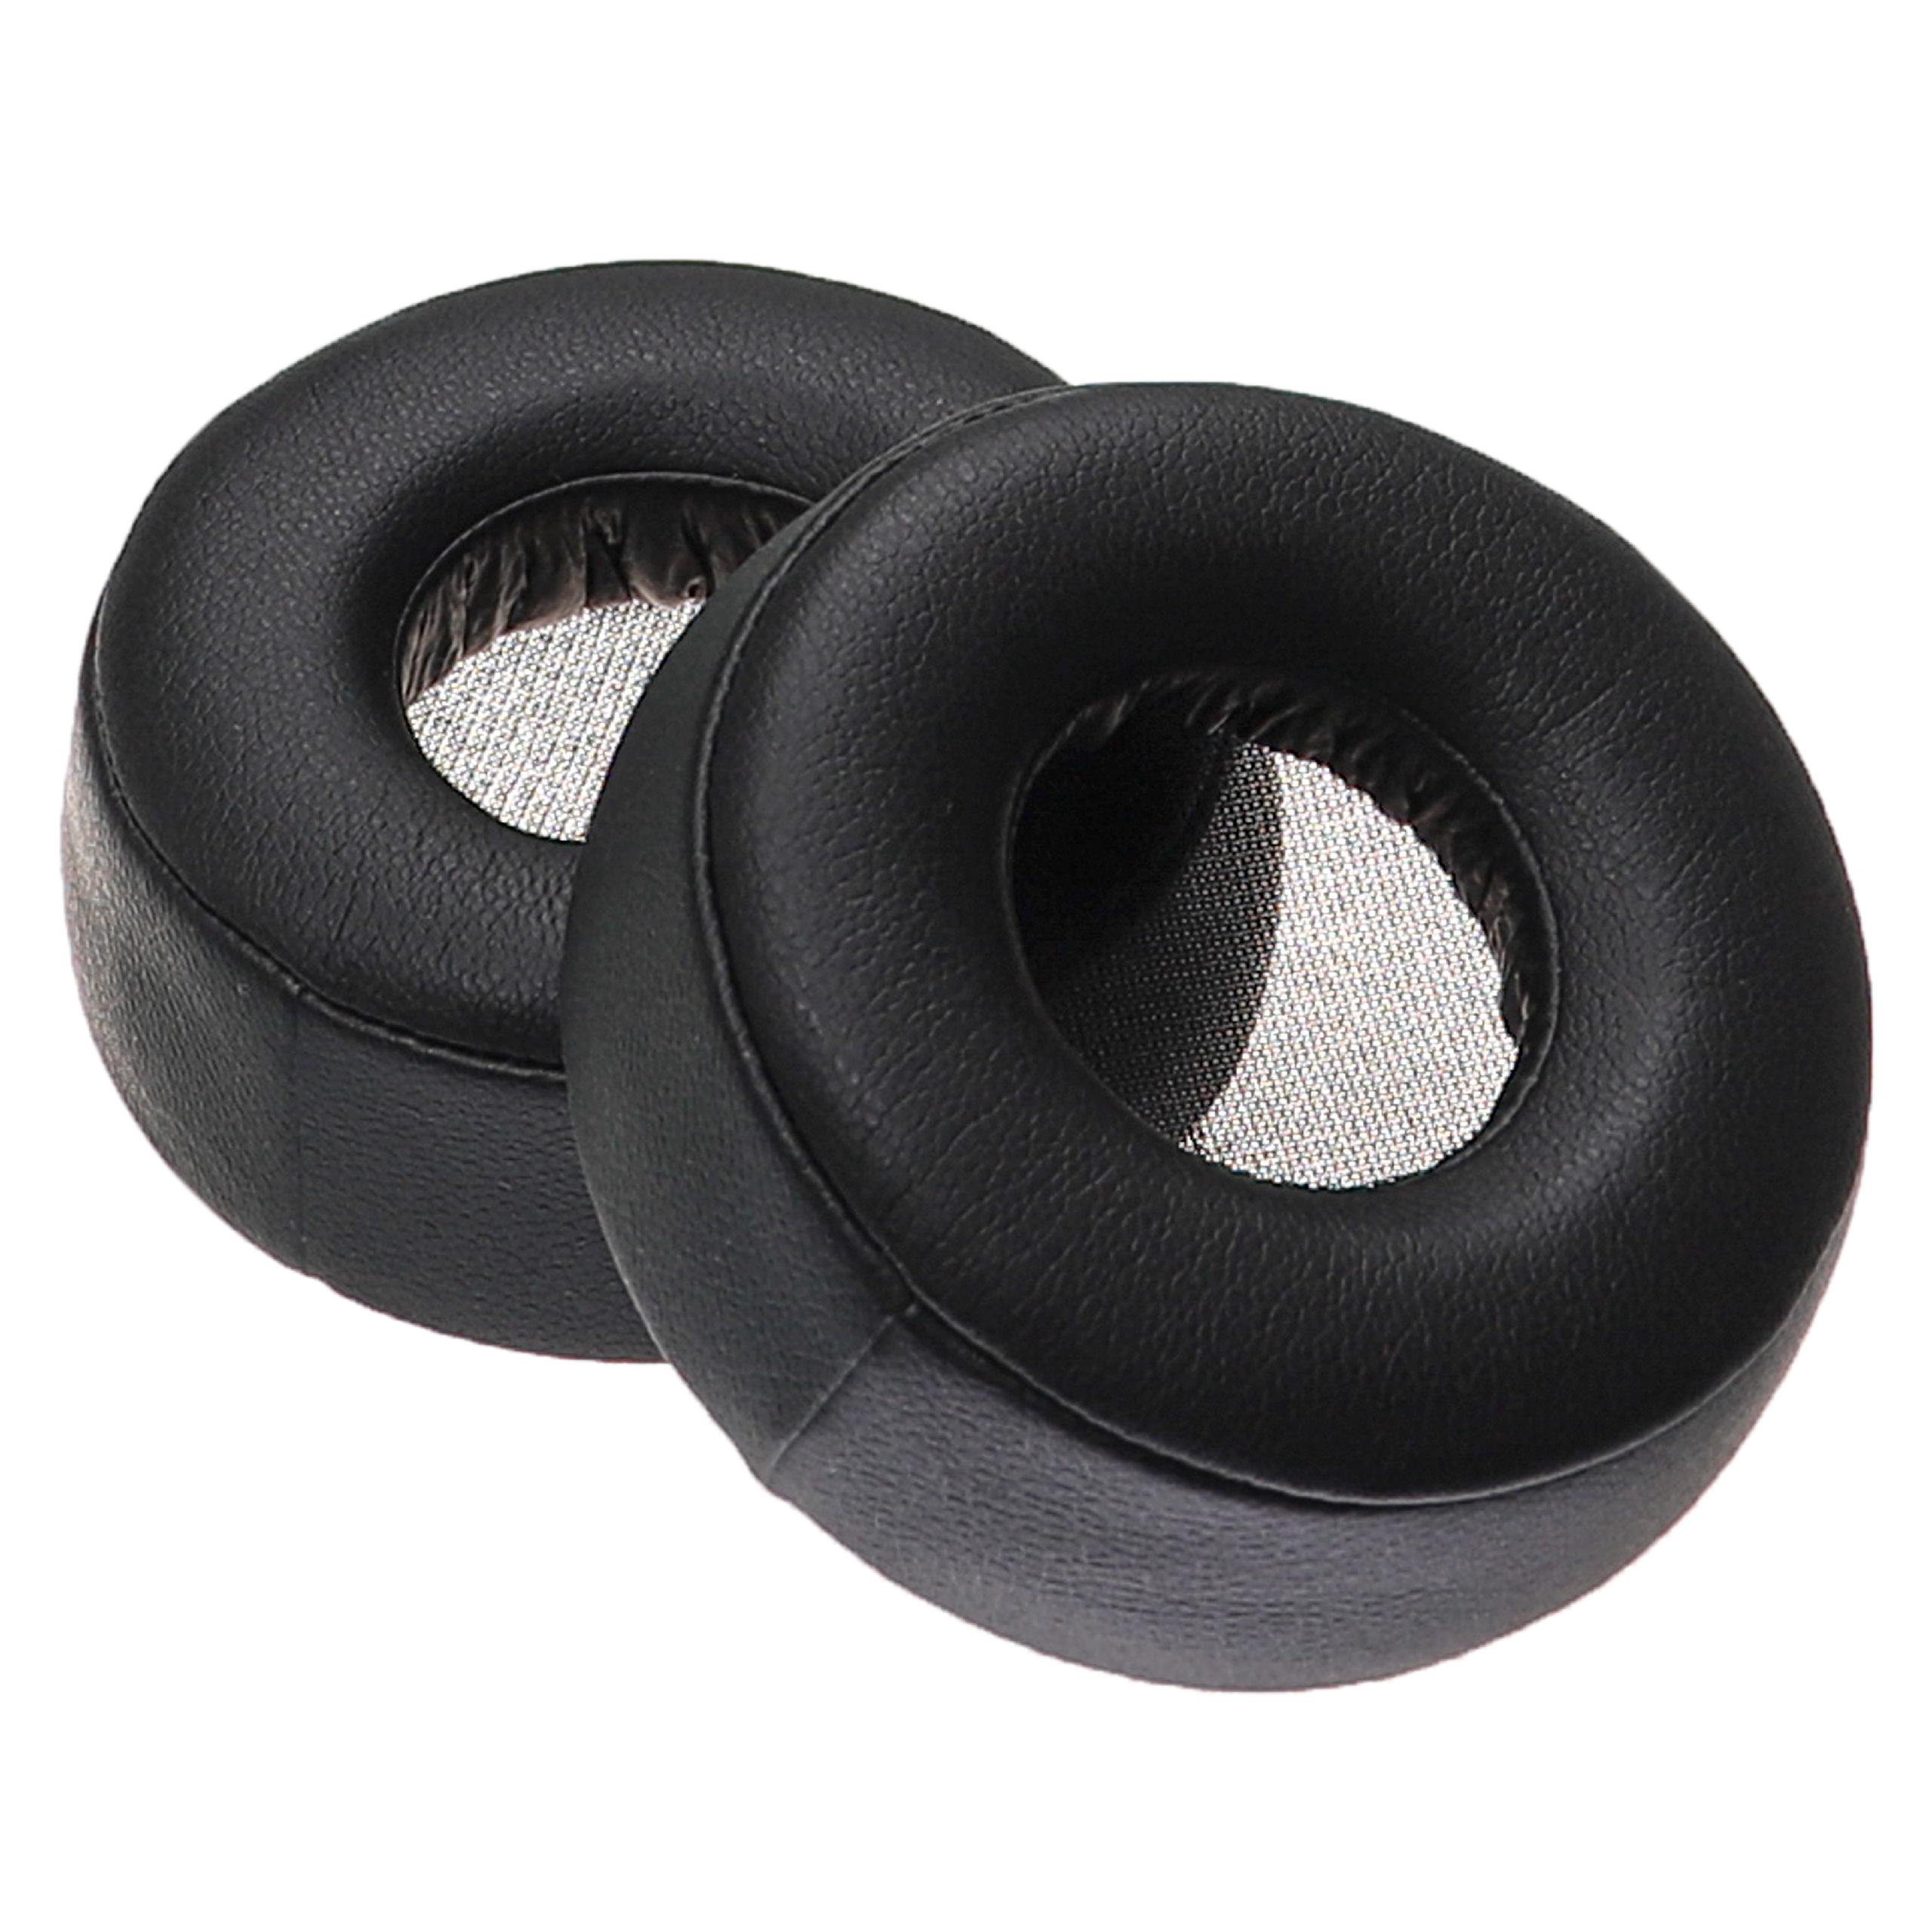 Ear pad cushions ear cups soft and highly elastic material black for headphones Headset